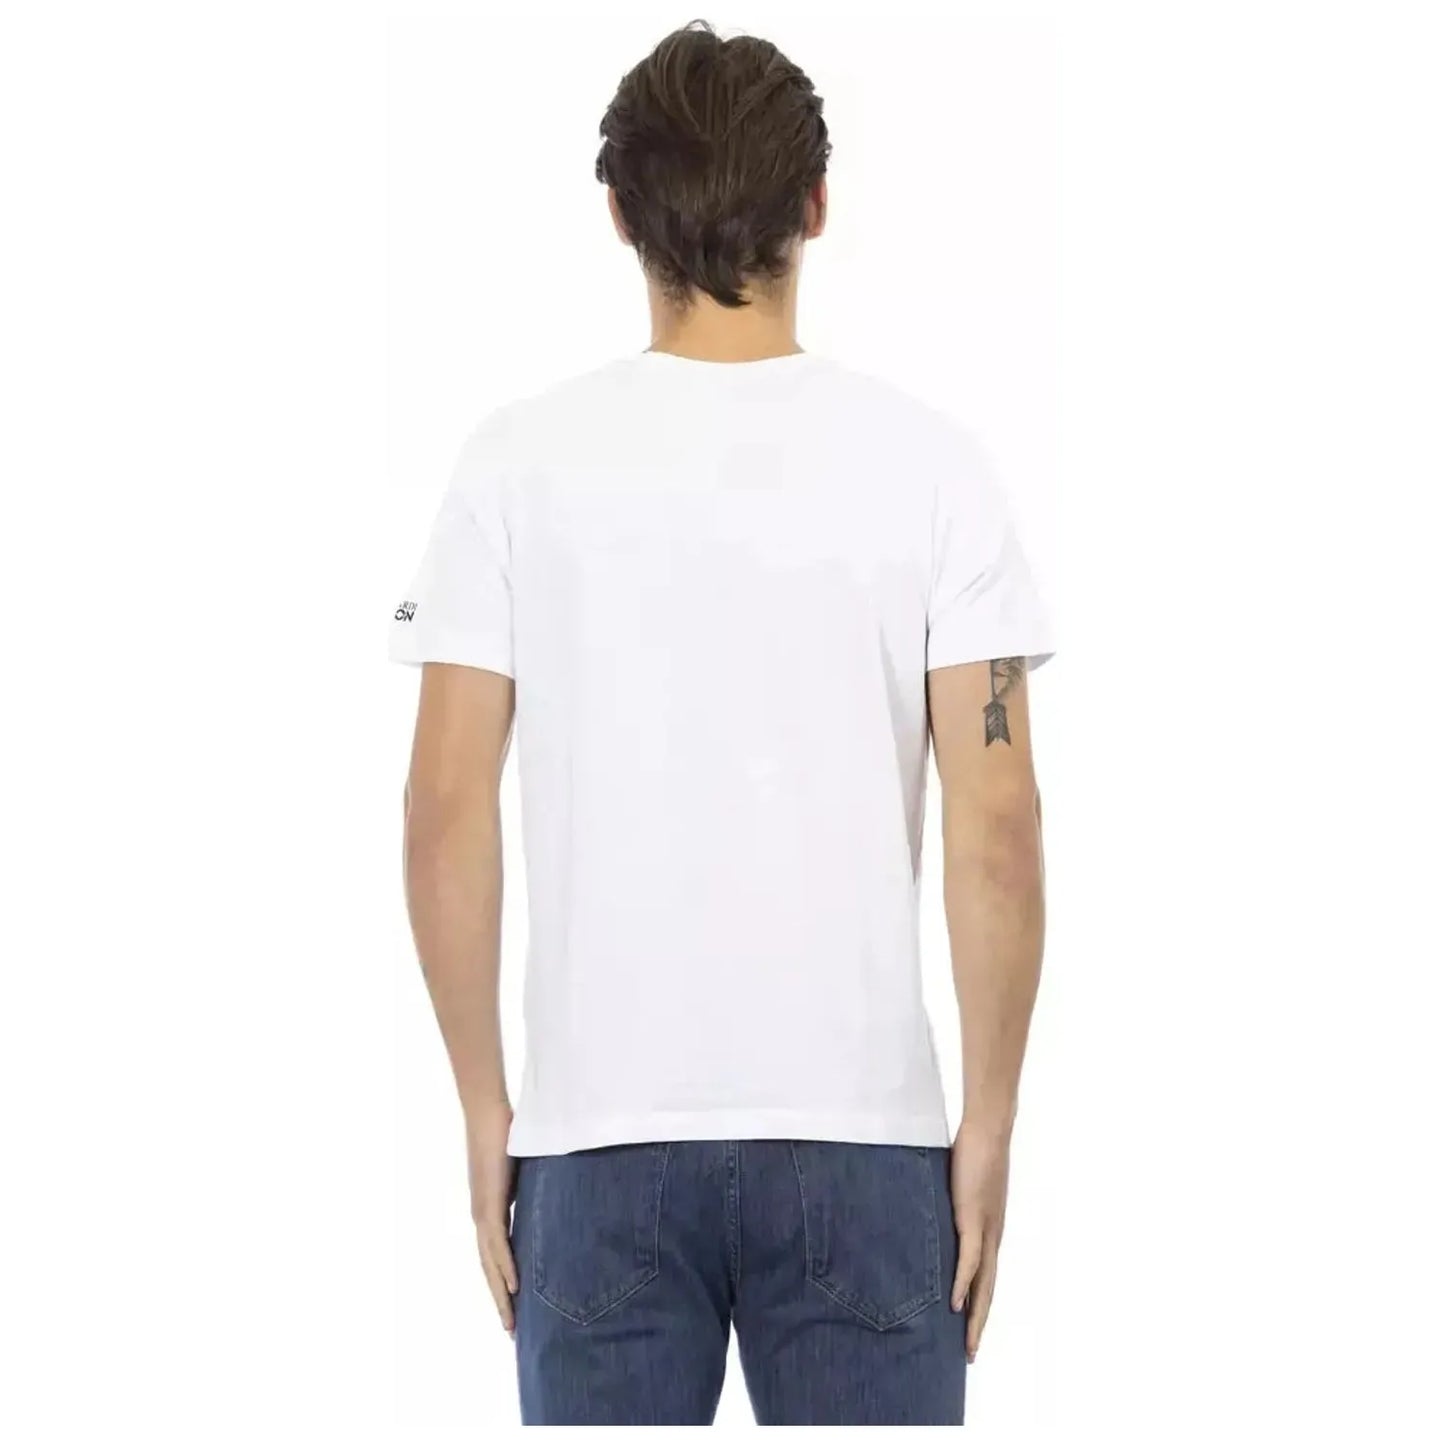 Trussardi Action Sleek V-Neck Tee with Artistic Front Print white-cotton-t-shirt-63